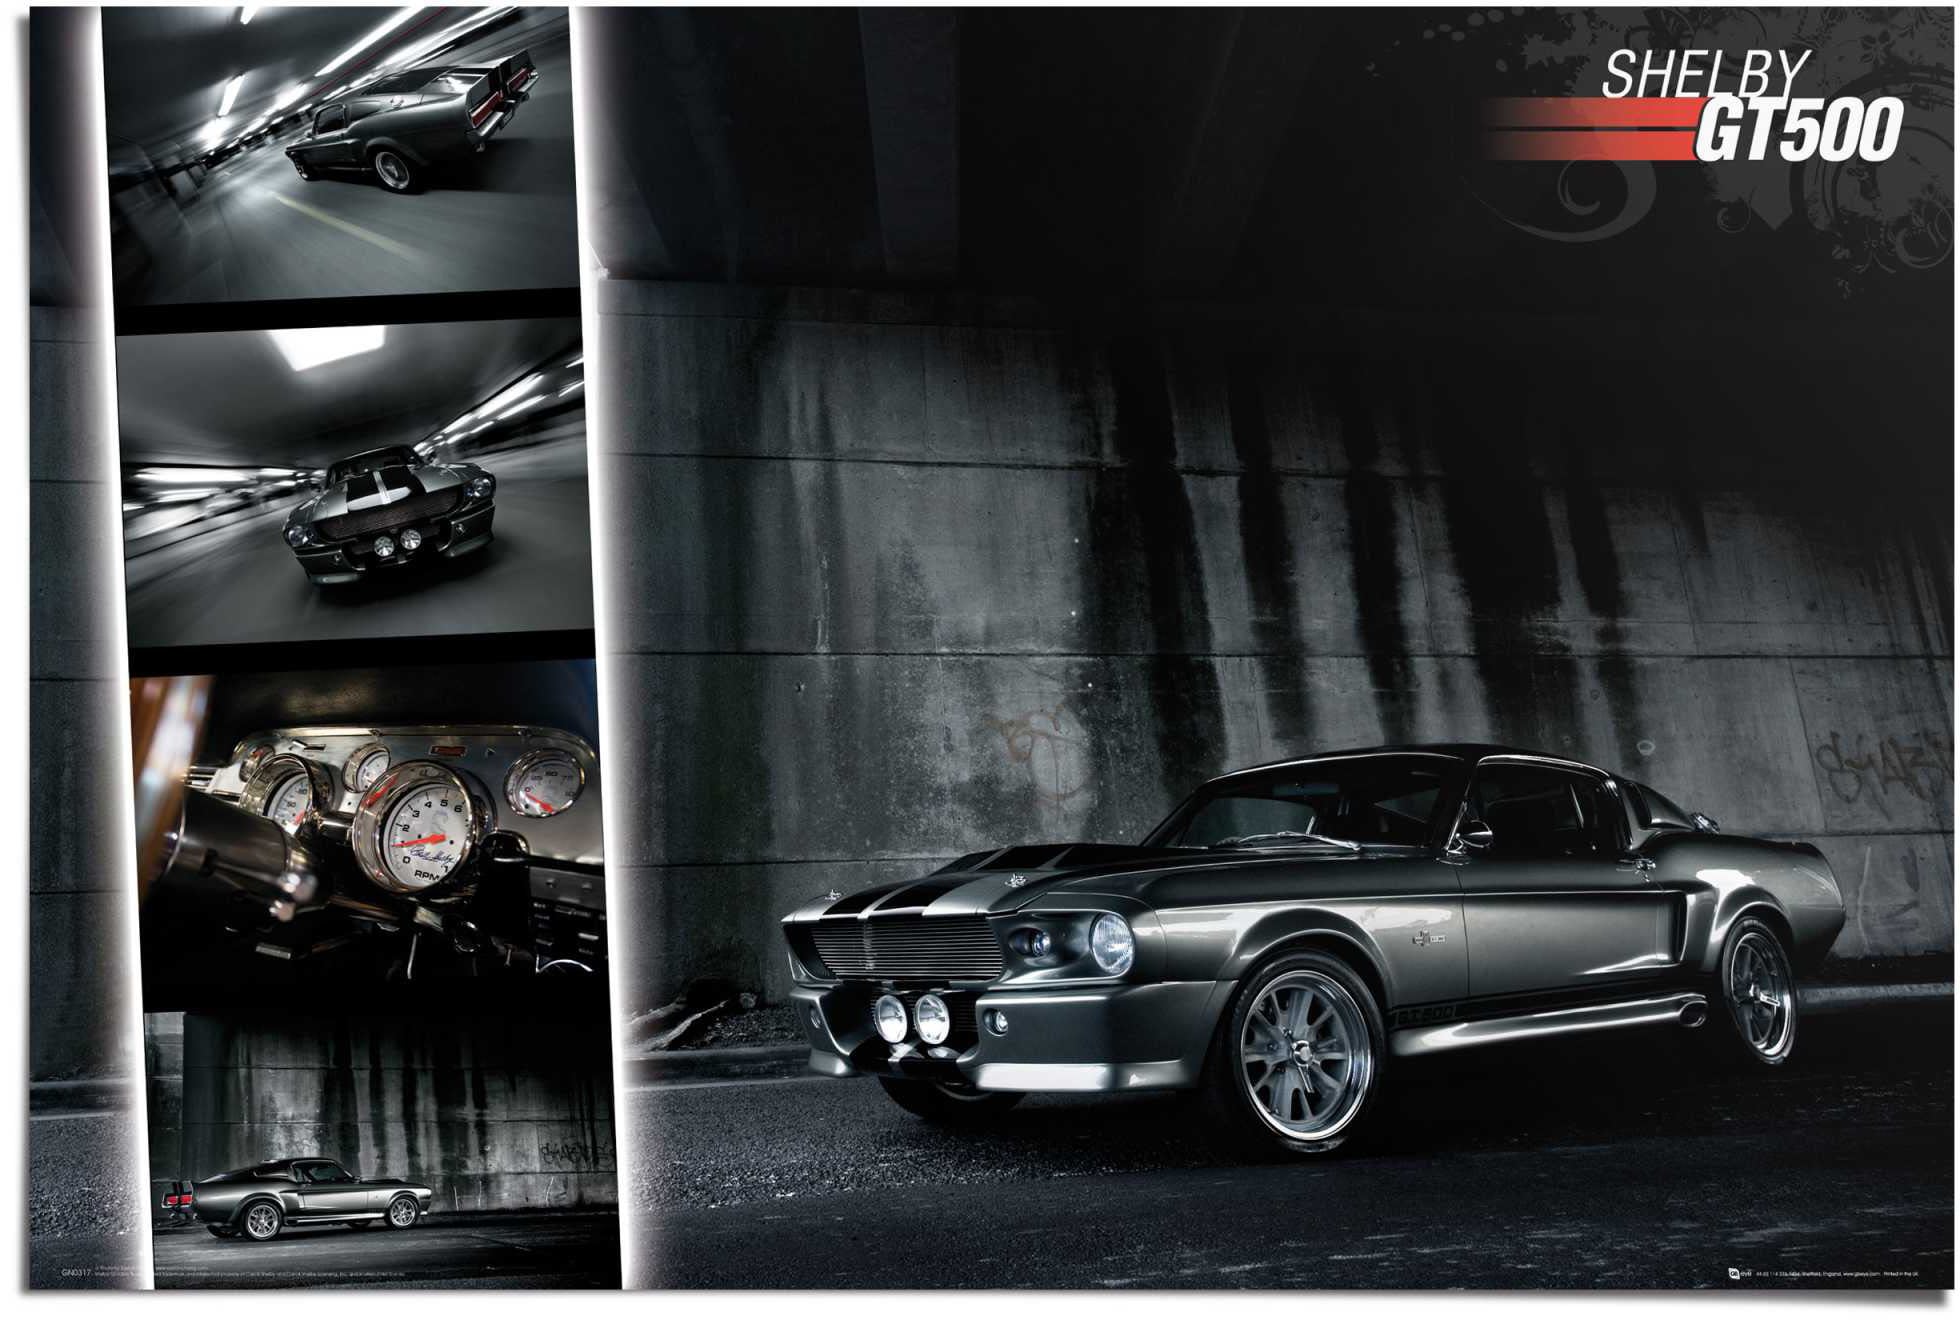 Reinders! St.) kaufen Poster Easton Mustang »Ford (1 GT500«,